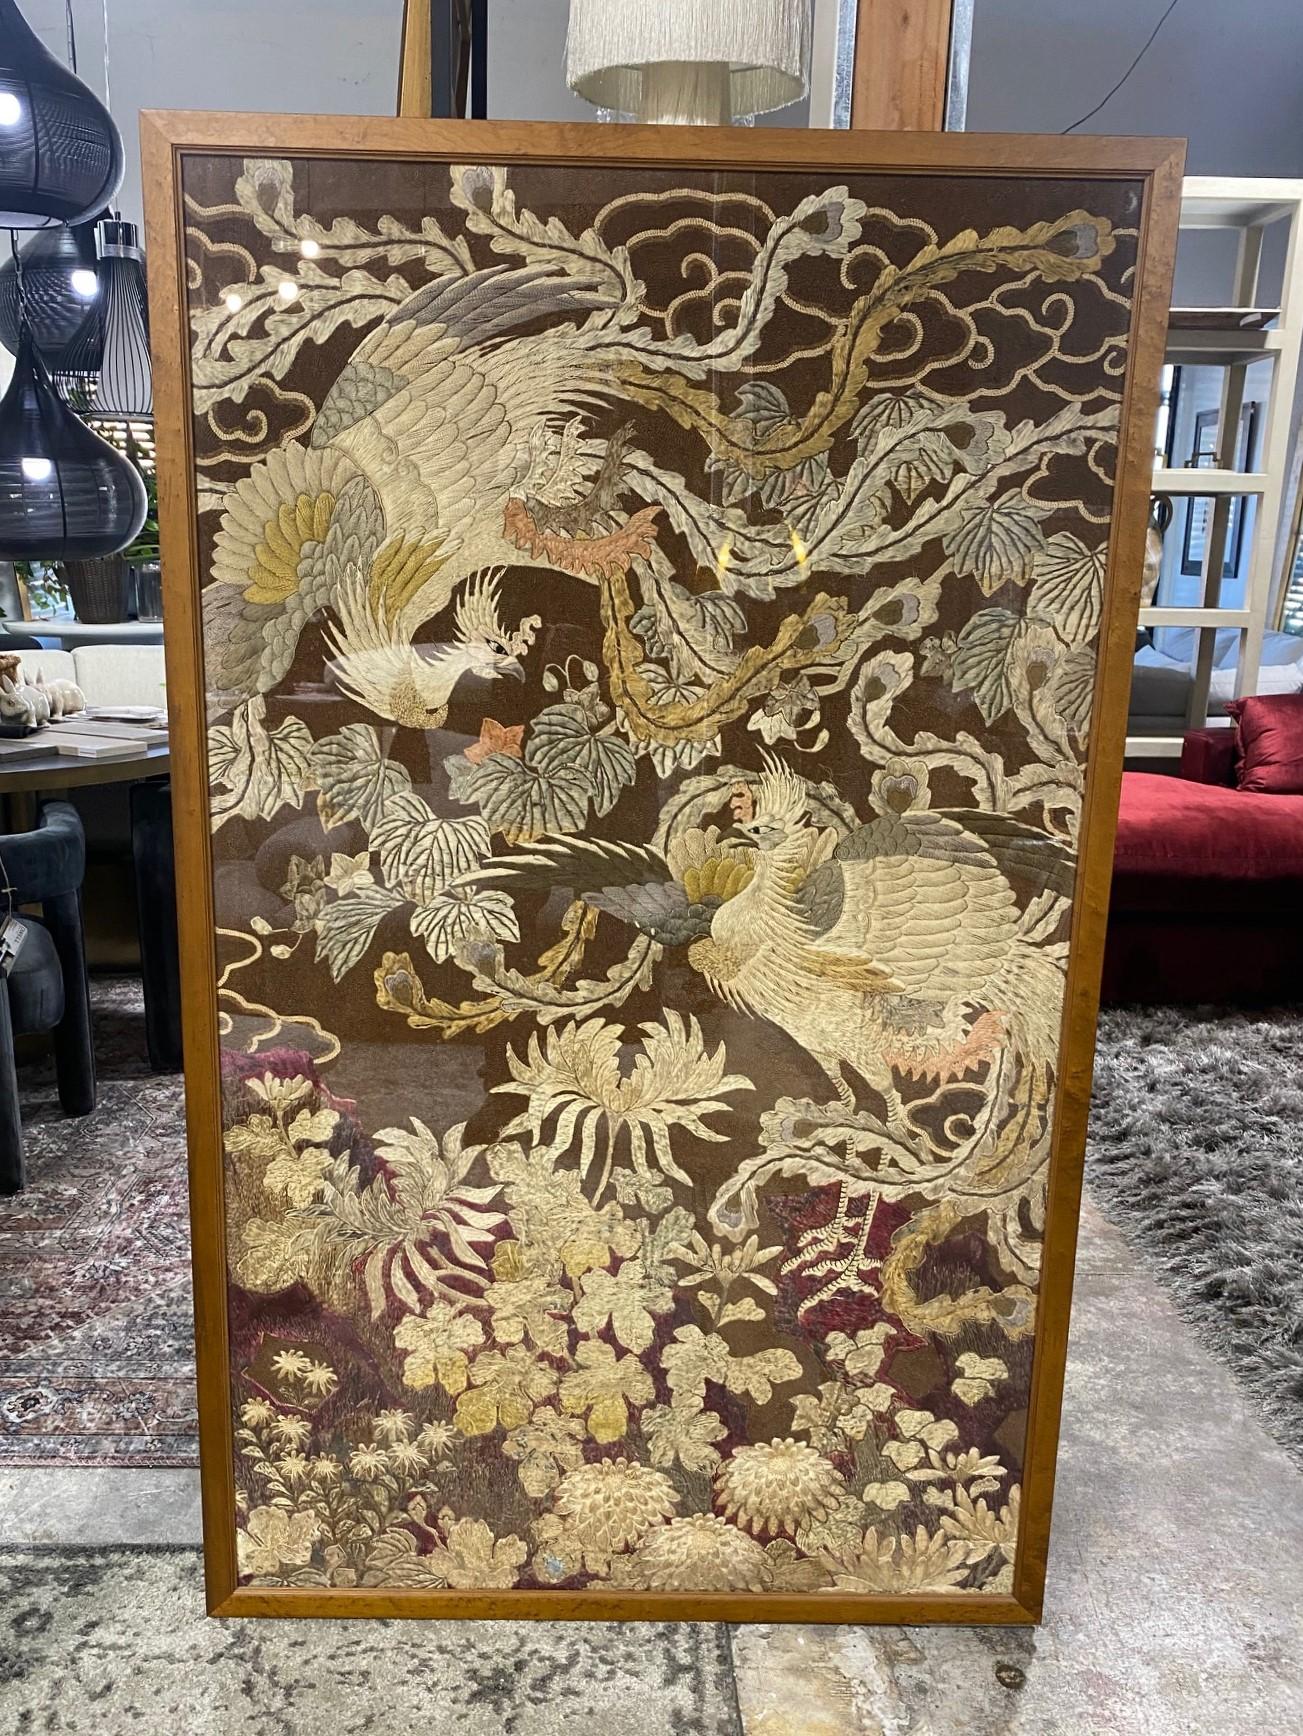 A stunning Meiji Period (1868-1912) Japanese large framed embroidery/ tapestry featuring a pair of finely detailed birds - likely peacocks in a floral garden landscape.  A truly magnificent work in both scale and design - quite wonderful and